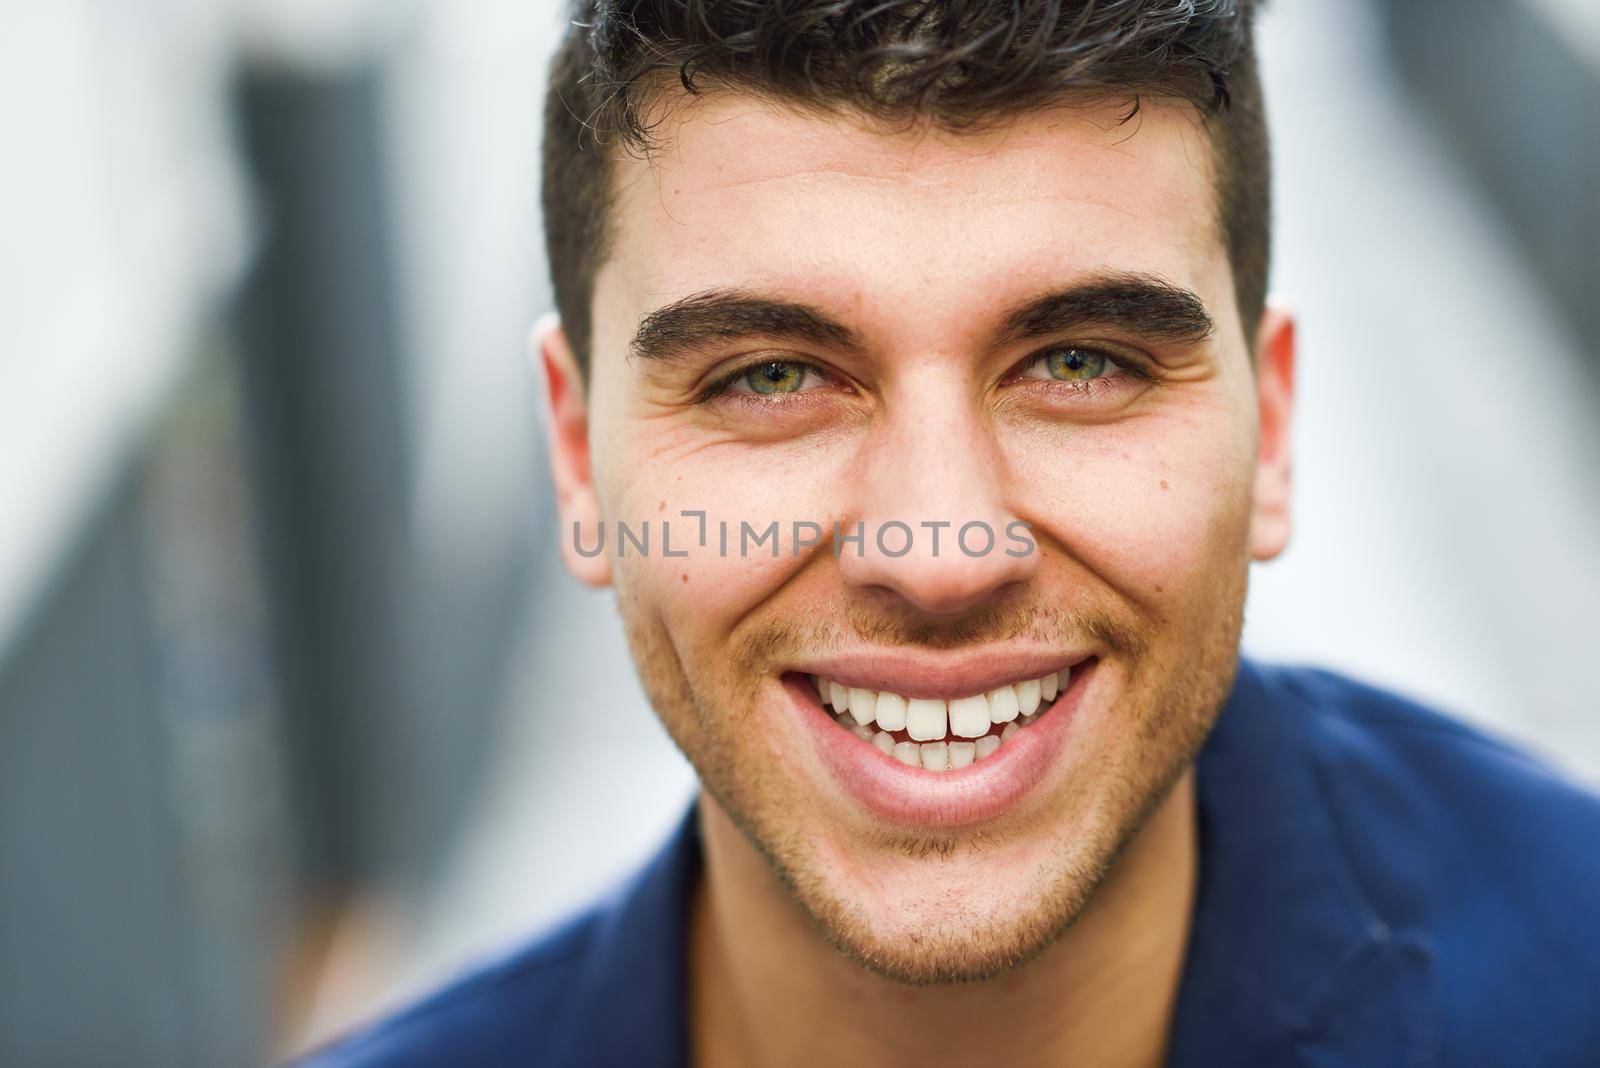 Good looking young man with blue eyes smiling in the street. Model of fashion in urban background wearing white t-shir and blue jacket